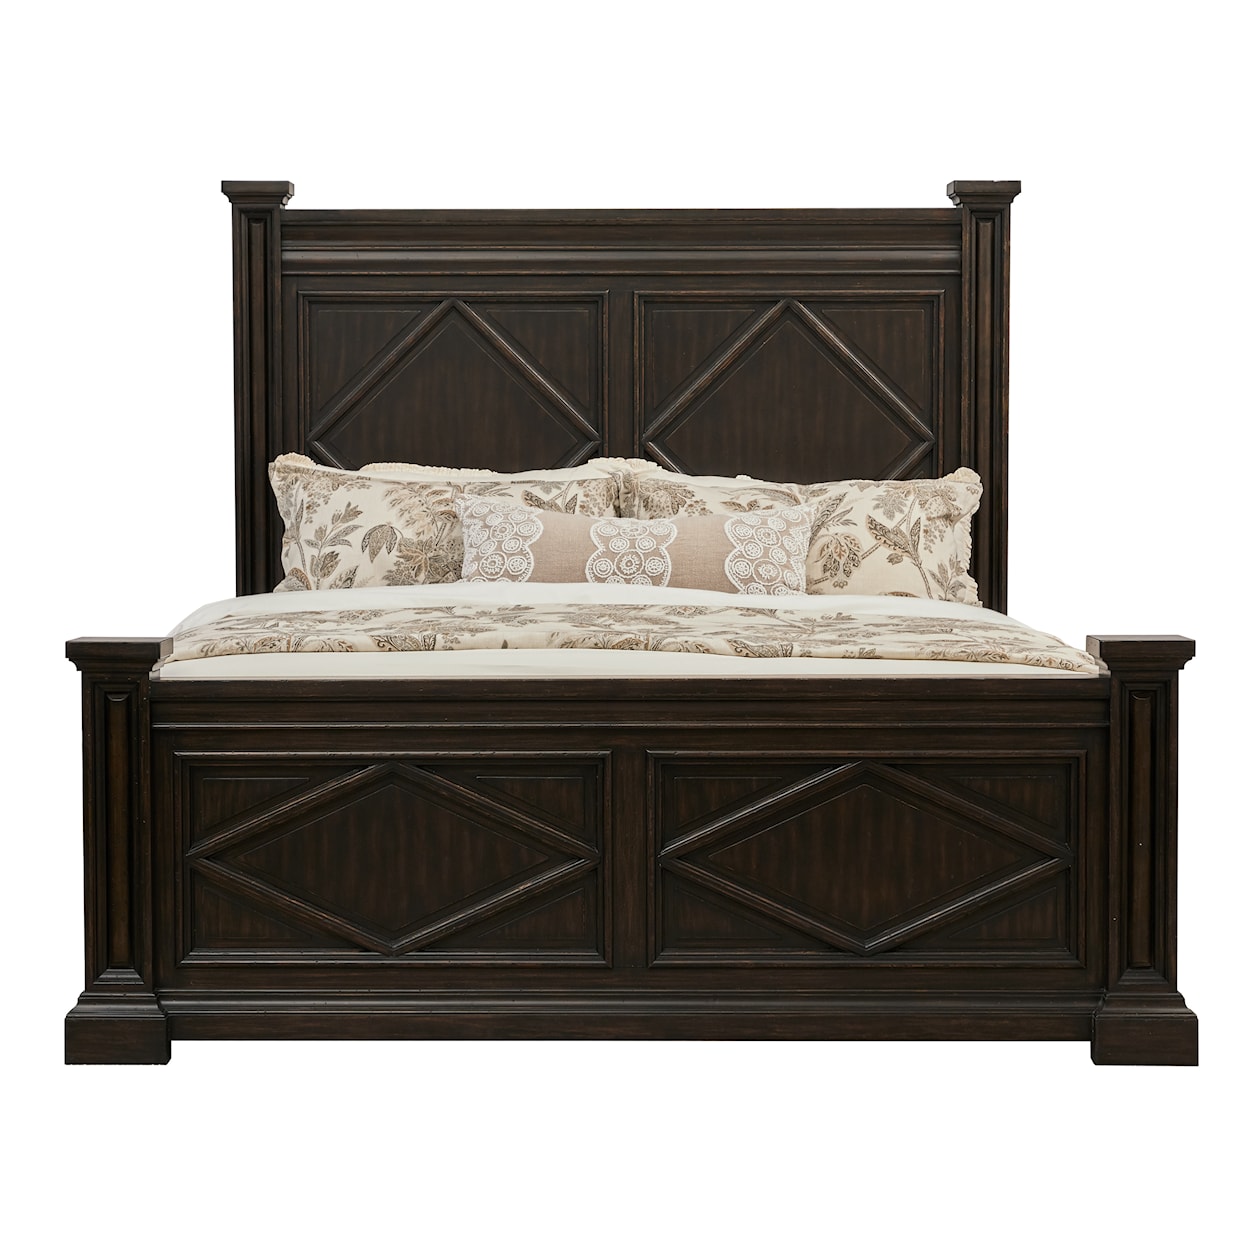 Samuel Lawrence Canyon Creek Queen Bed